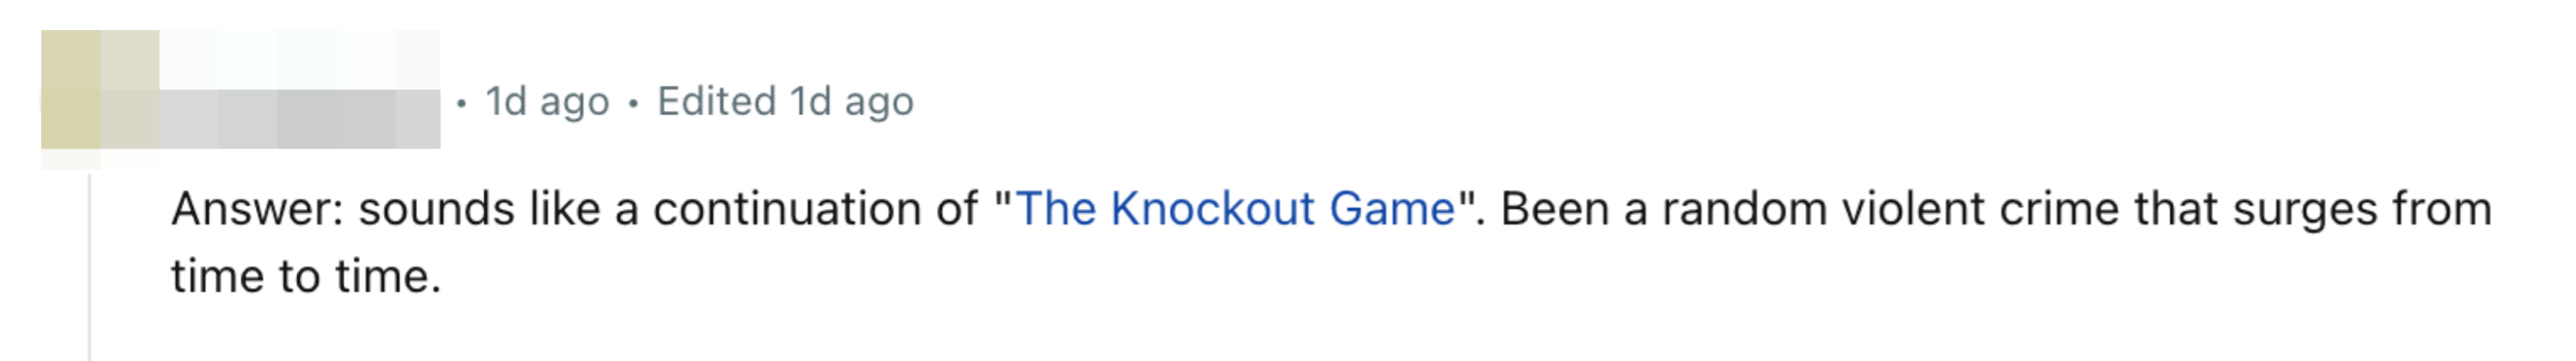 User HorseStupid comments on a potential resurgence of &quot;The Knockout Game,&quot; a random violent crime trend